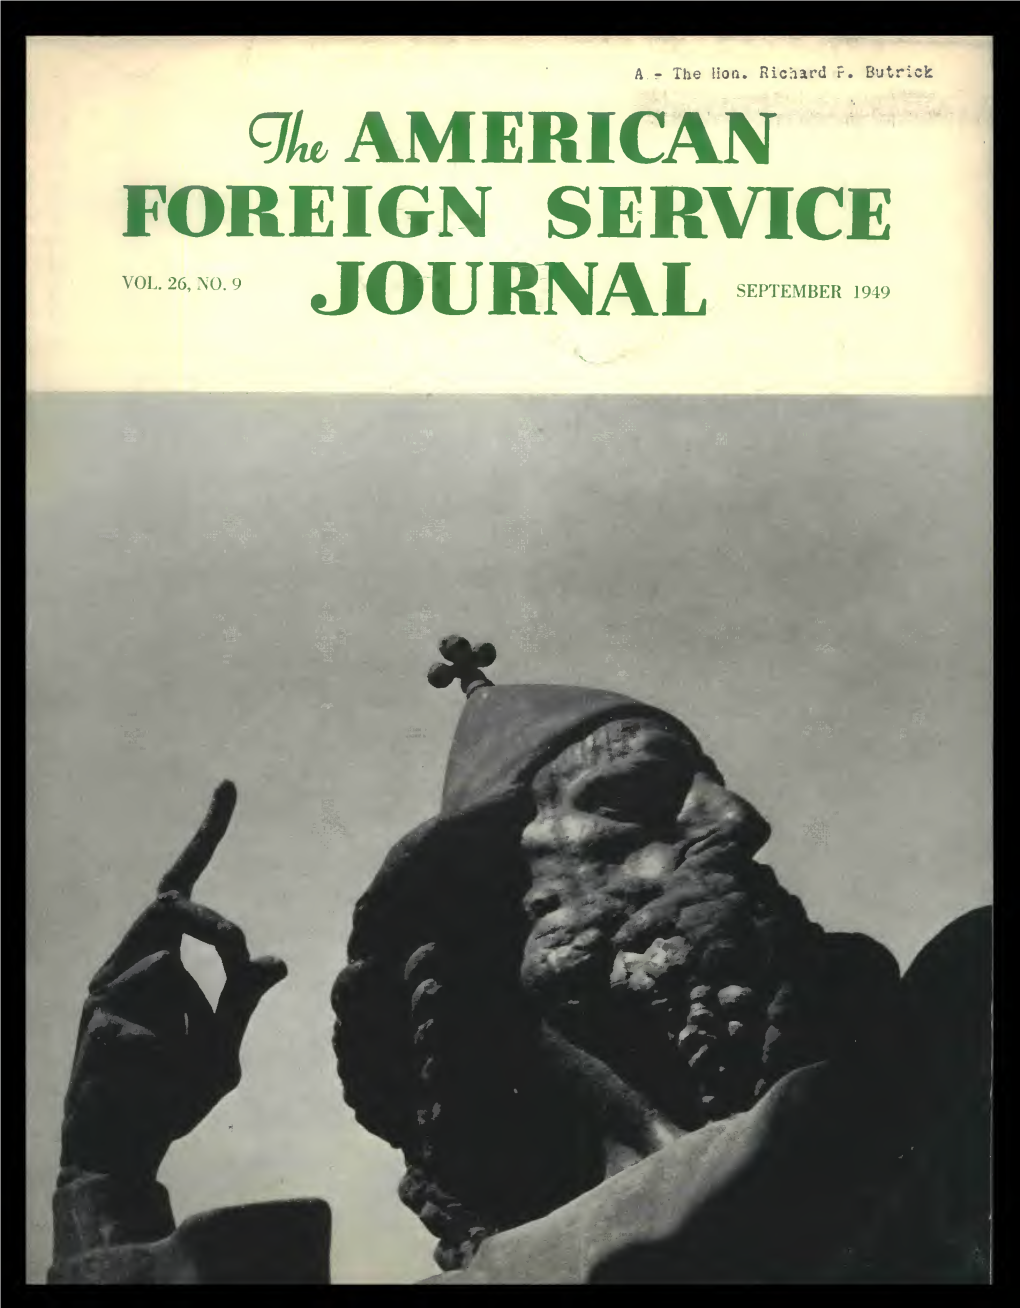 The Foreign Service Journal, September 1949